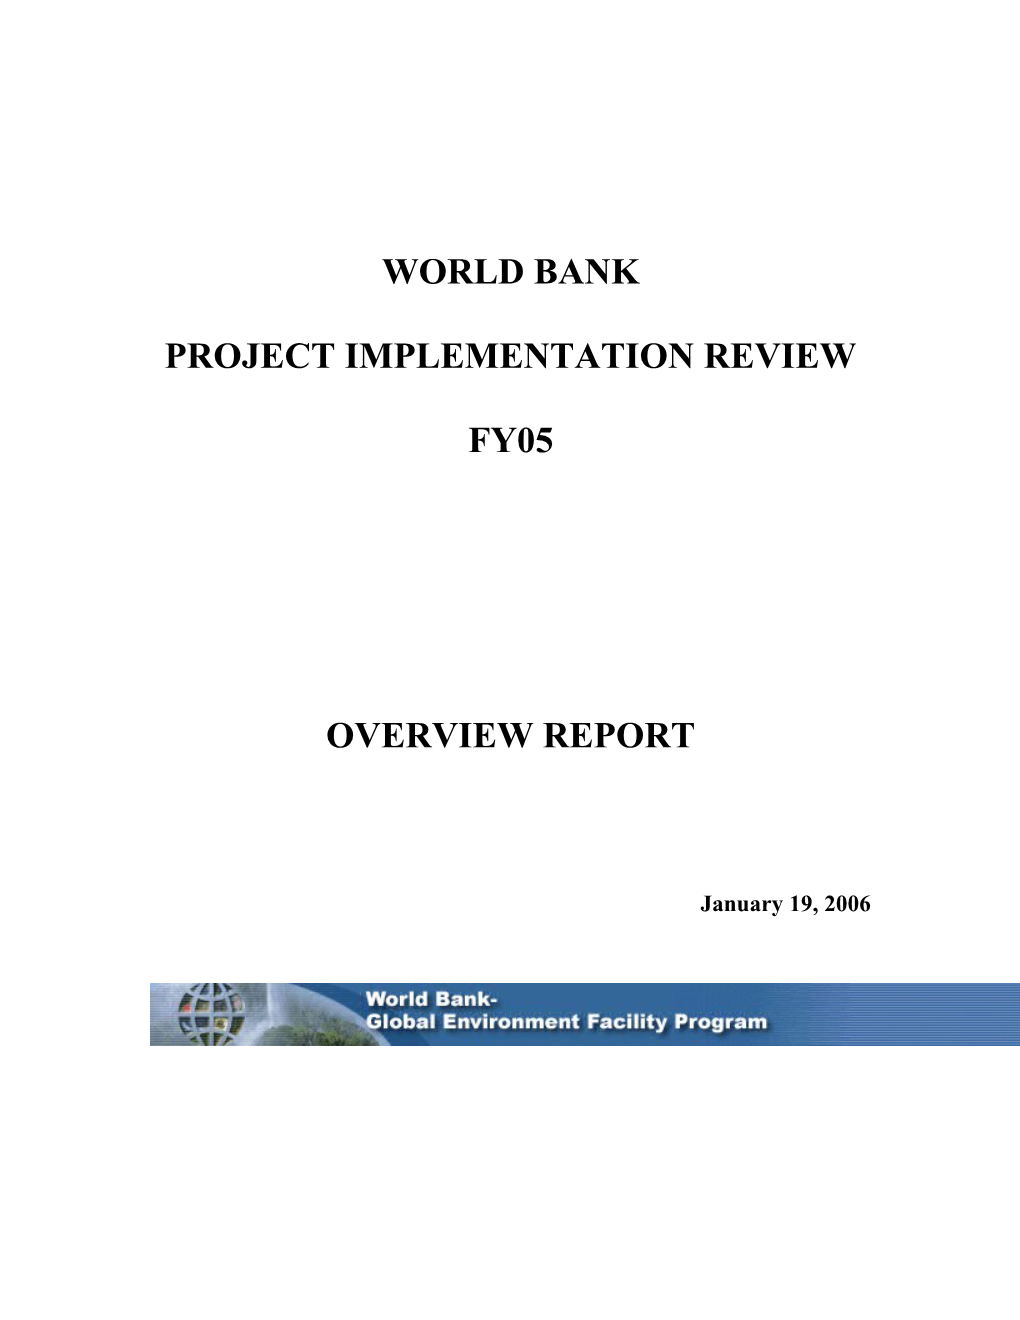 Project Implementation Review